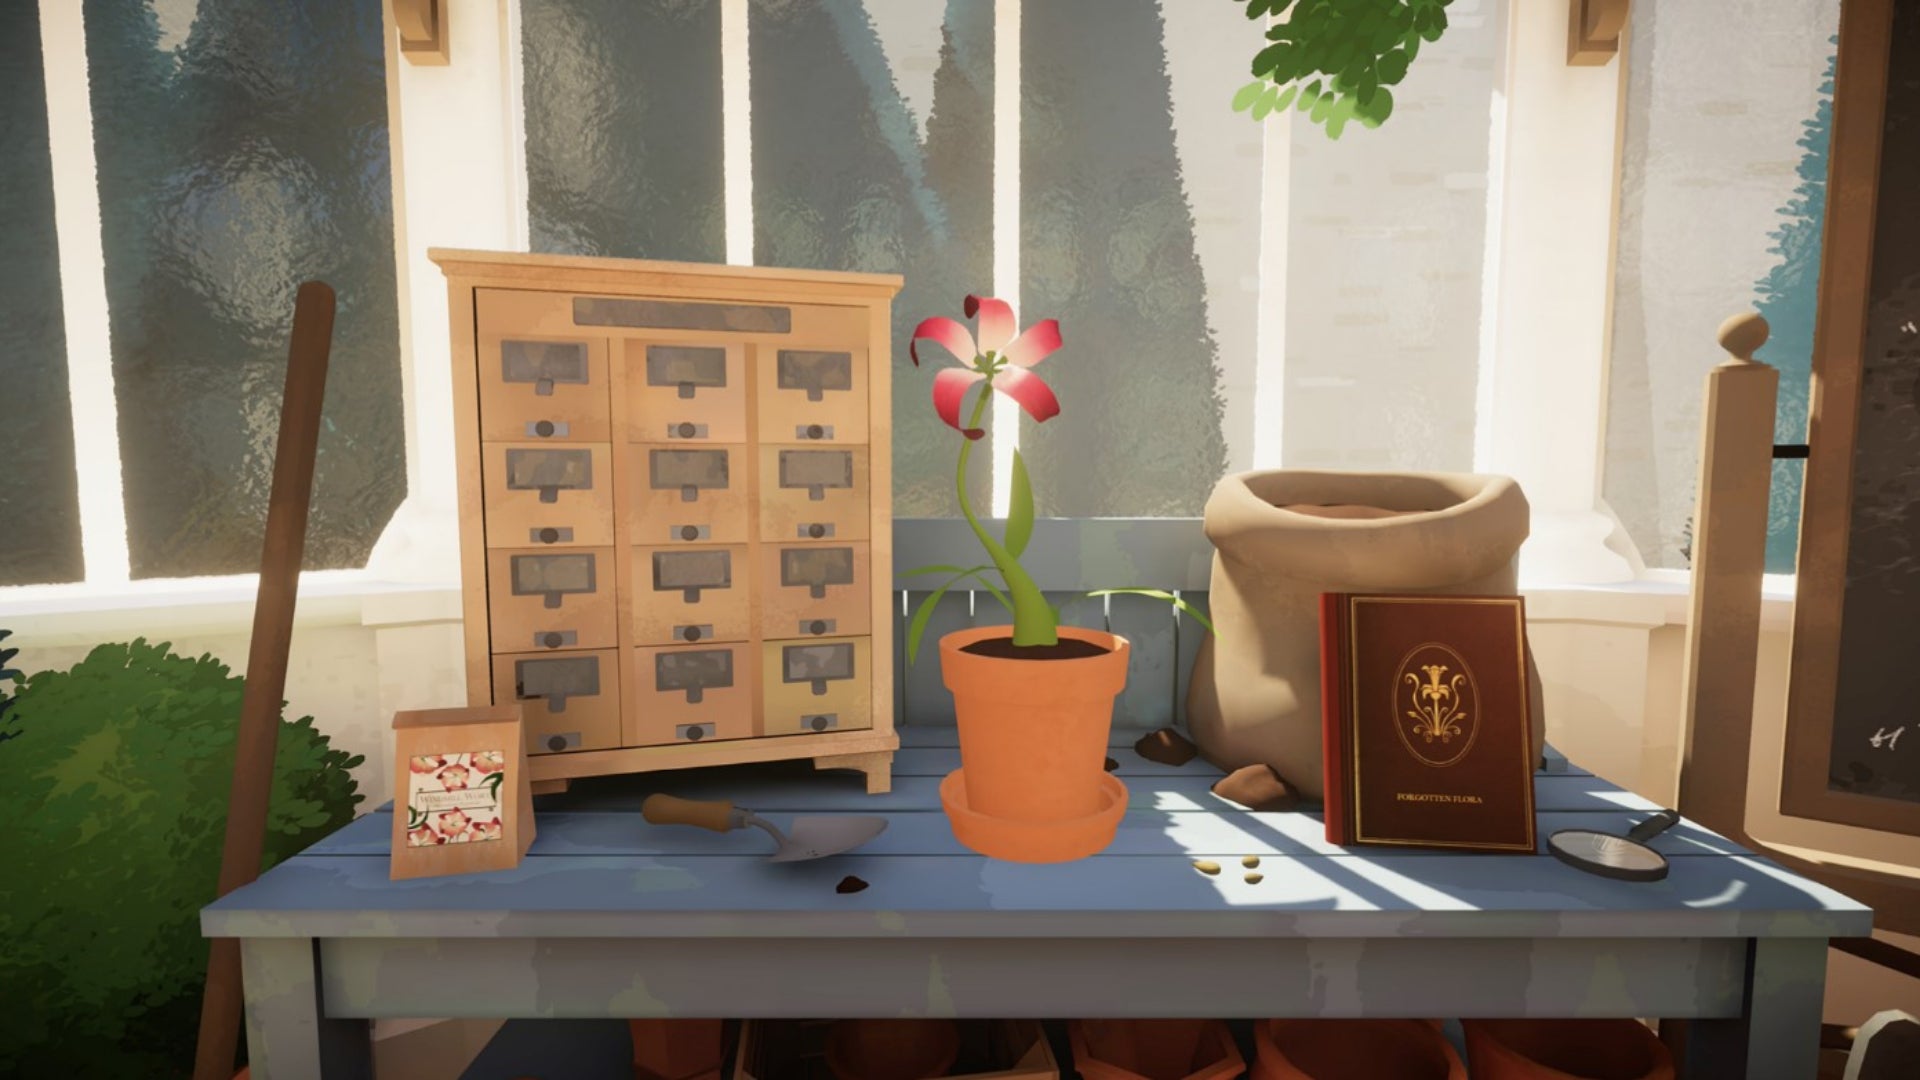 A gardening table with a flower on it in Botany Manor